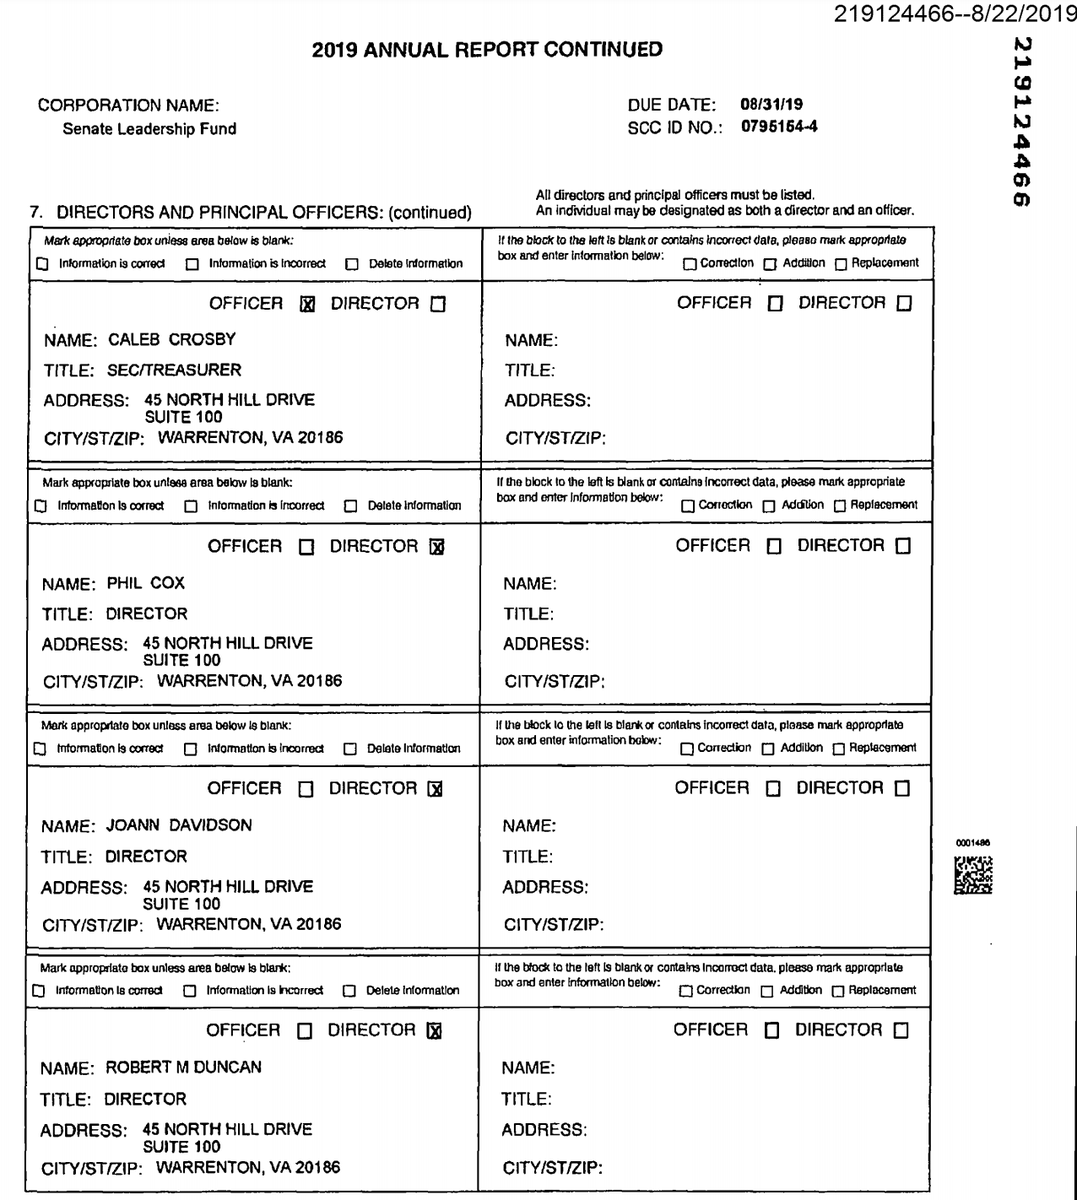 Duncan is also listed as Director in most recent paperwork filed by Senate Leadership Fund (he & McConnell are old KY pals) & as a current Commiteeman for the  @GOP, which he ran from 2007-2009. https://cis.scc.virginia.gov/EntitySearch/BusinessInformation?businessId=298522&source=FromEntityResult&isSeries=FalseAnd he donated $5,600 to Trump Victory Fund on 6/30/2020.